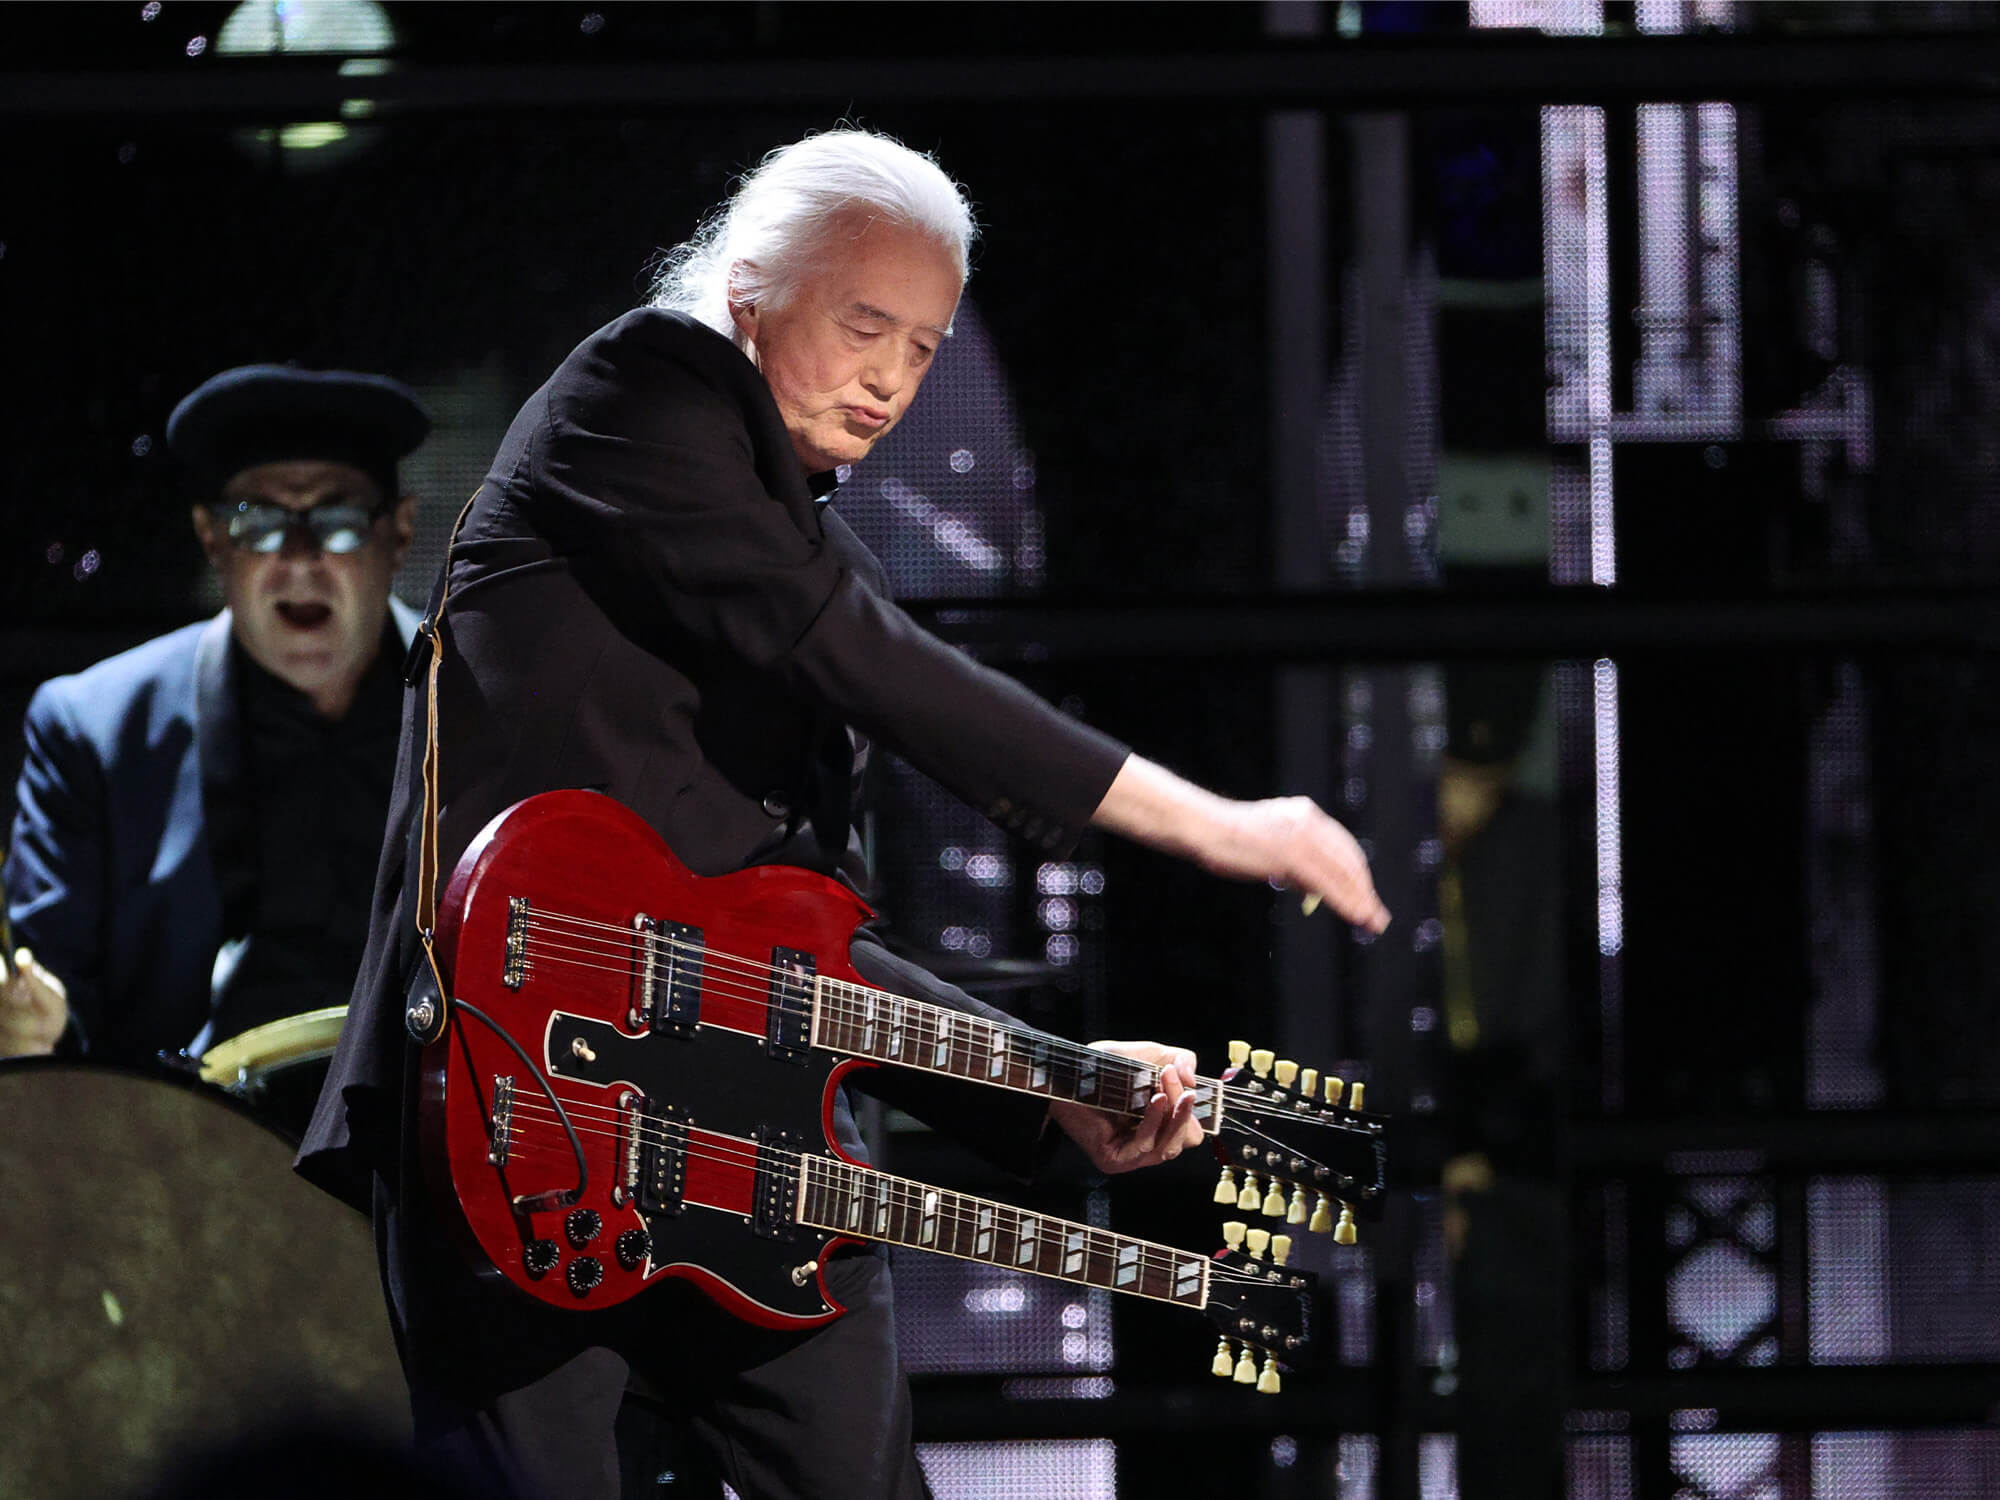 Jimmy Page playing the double neck guitar on stage